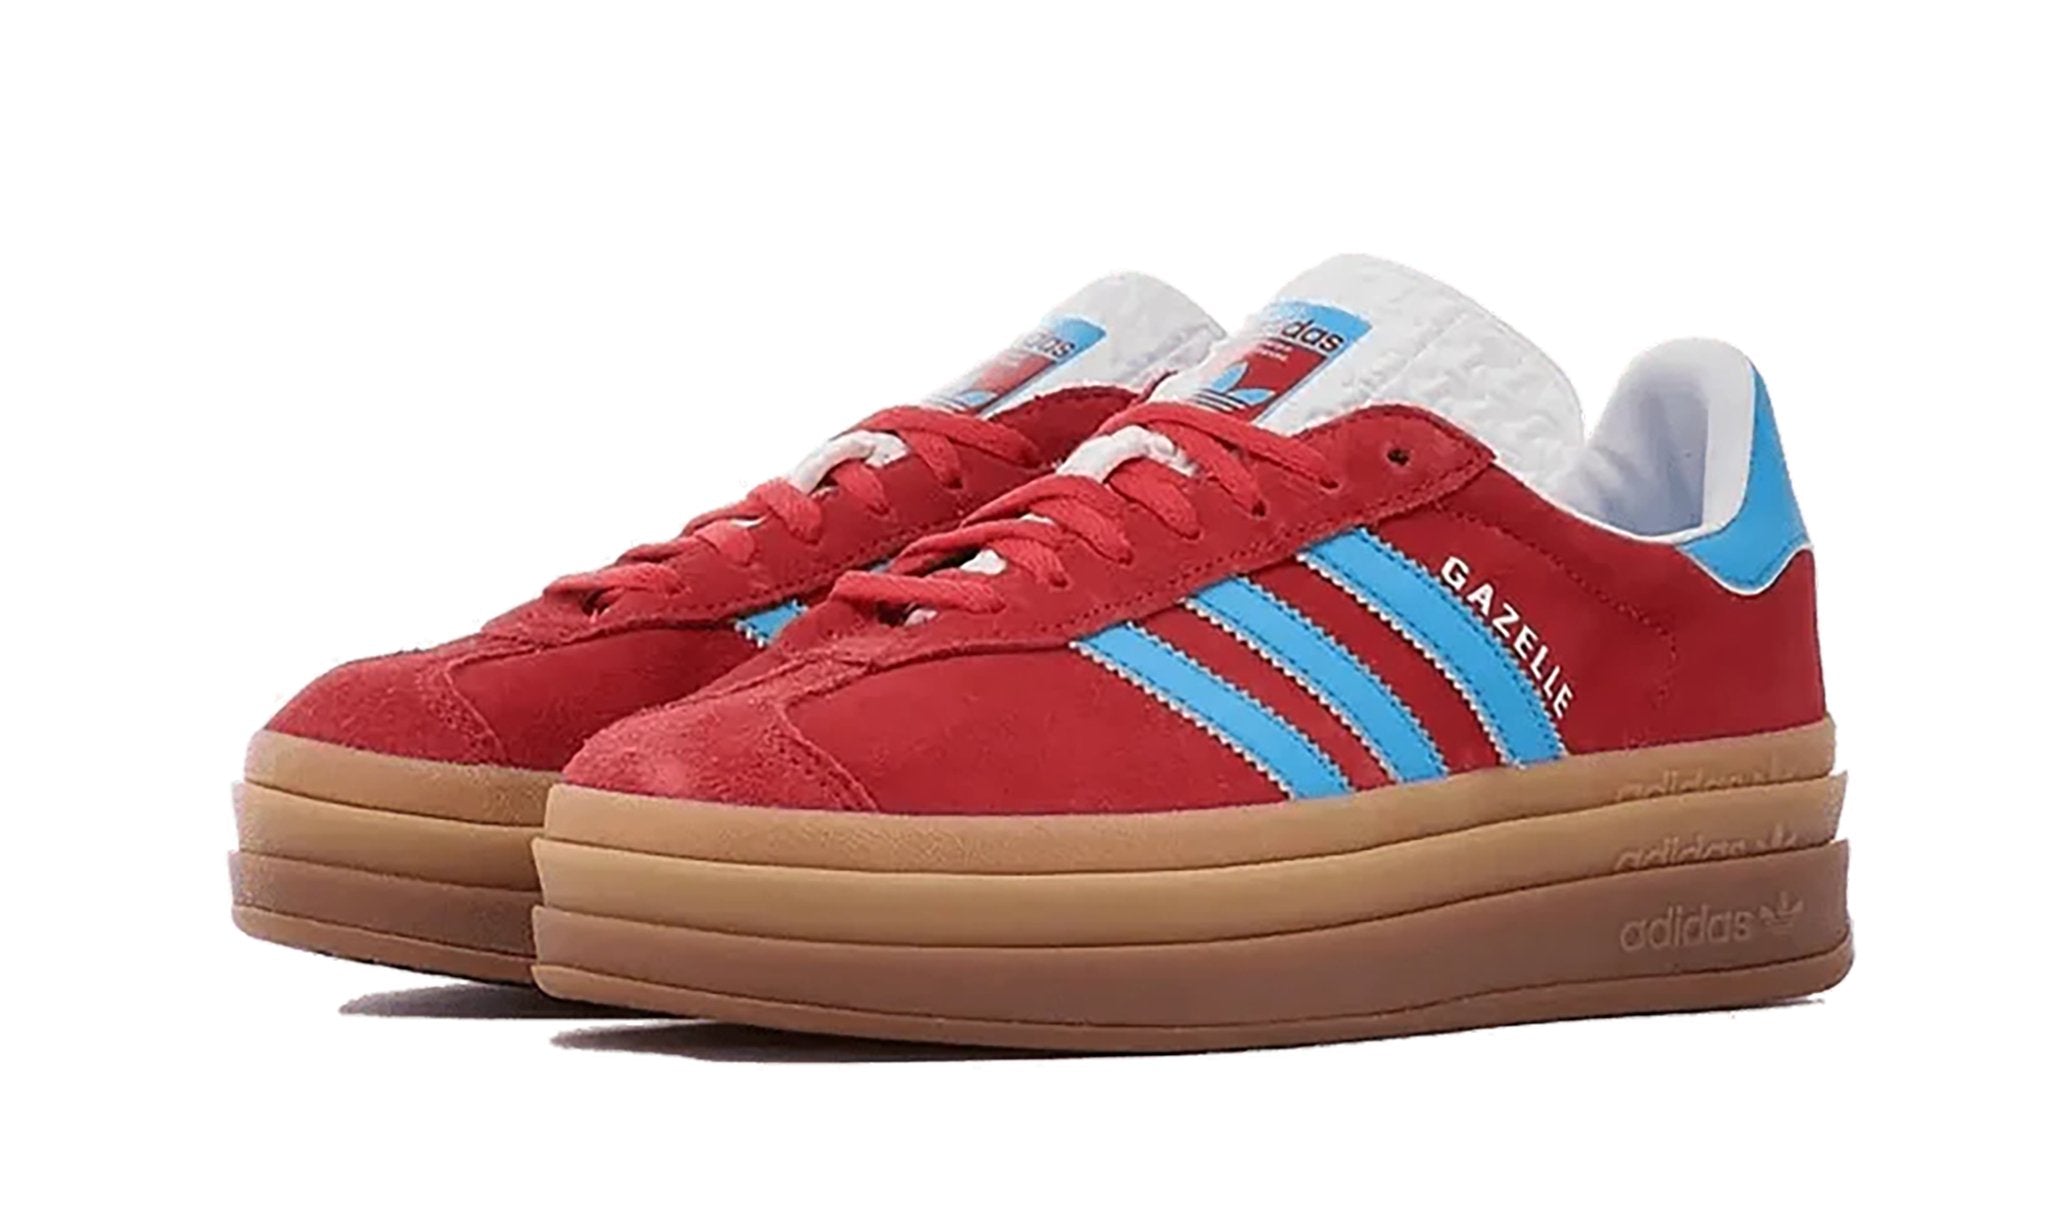 adidas Gazelle Bold Active Pink Blue Burst (W) - IE0421 - Sneakers